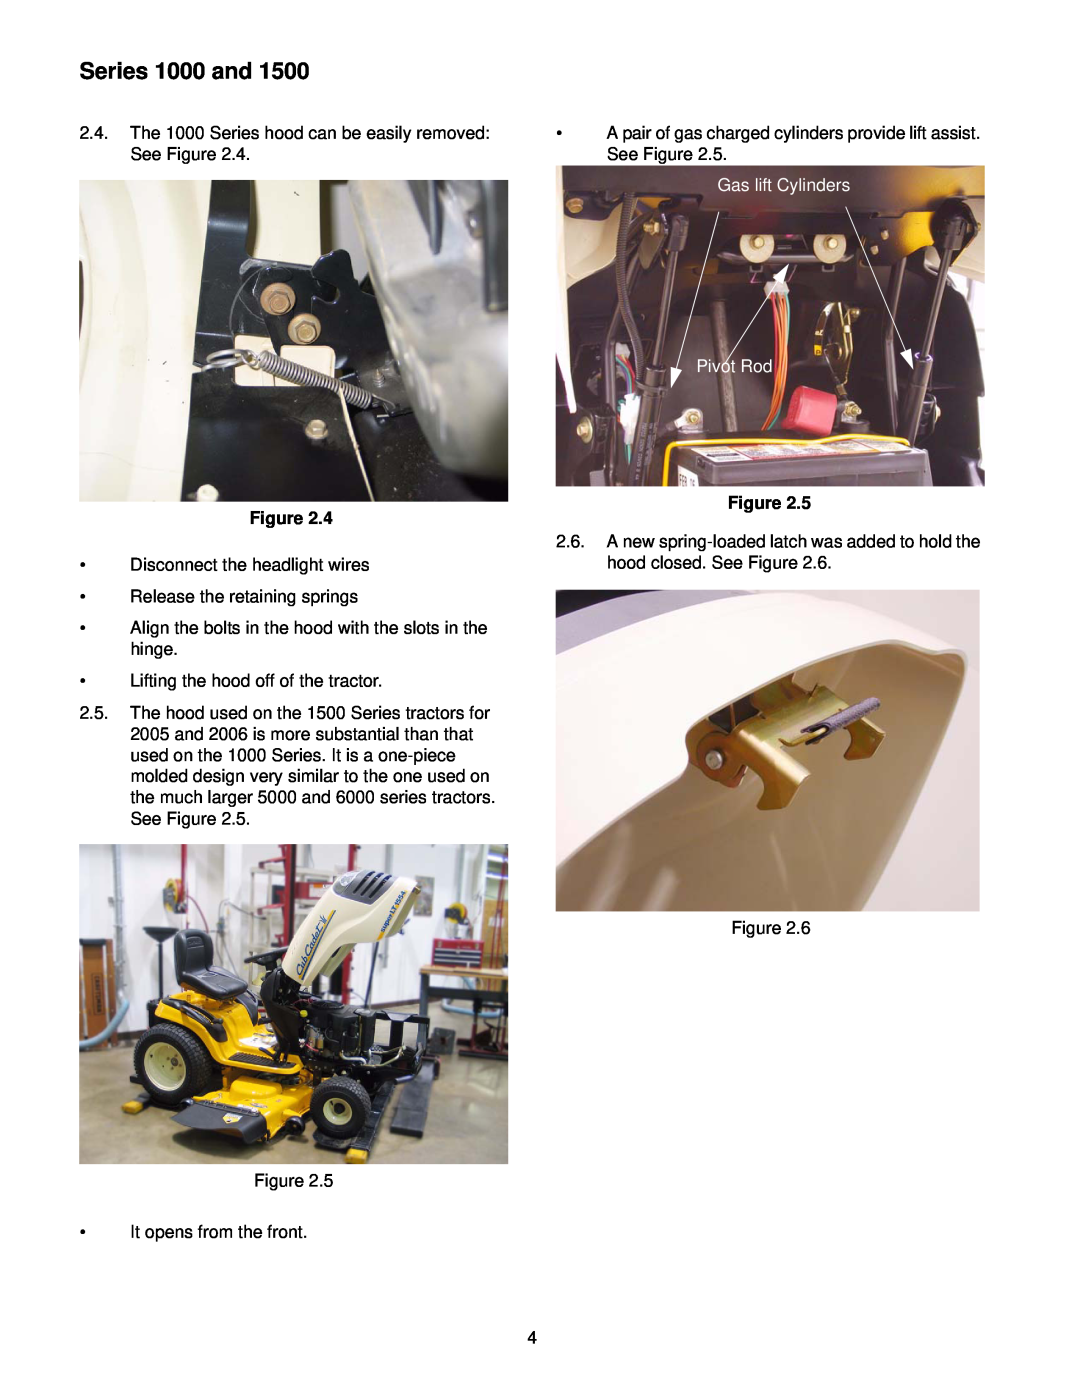 Cub Cadet SERIES 1000 manual Series 1000 and, Disconnect the headlight wires, Gas lift Cylinders Pivot Rod 